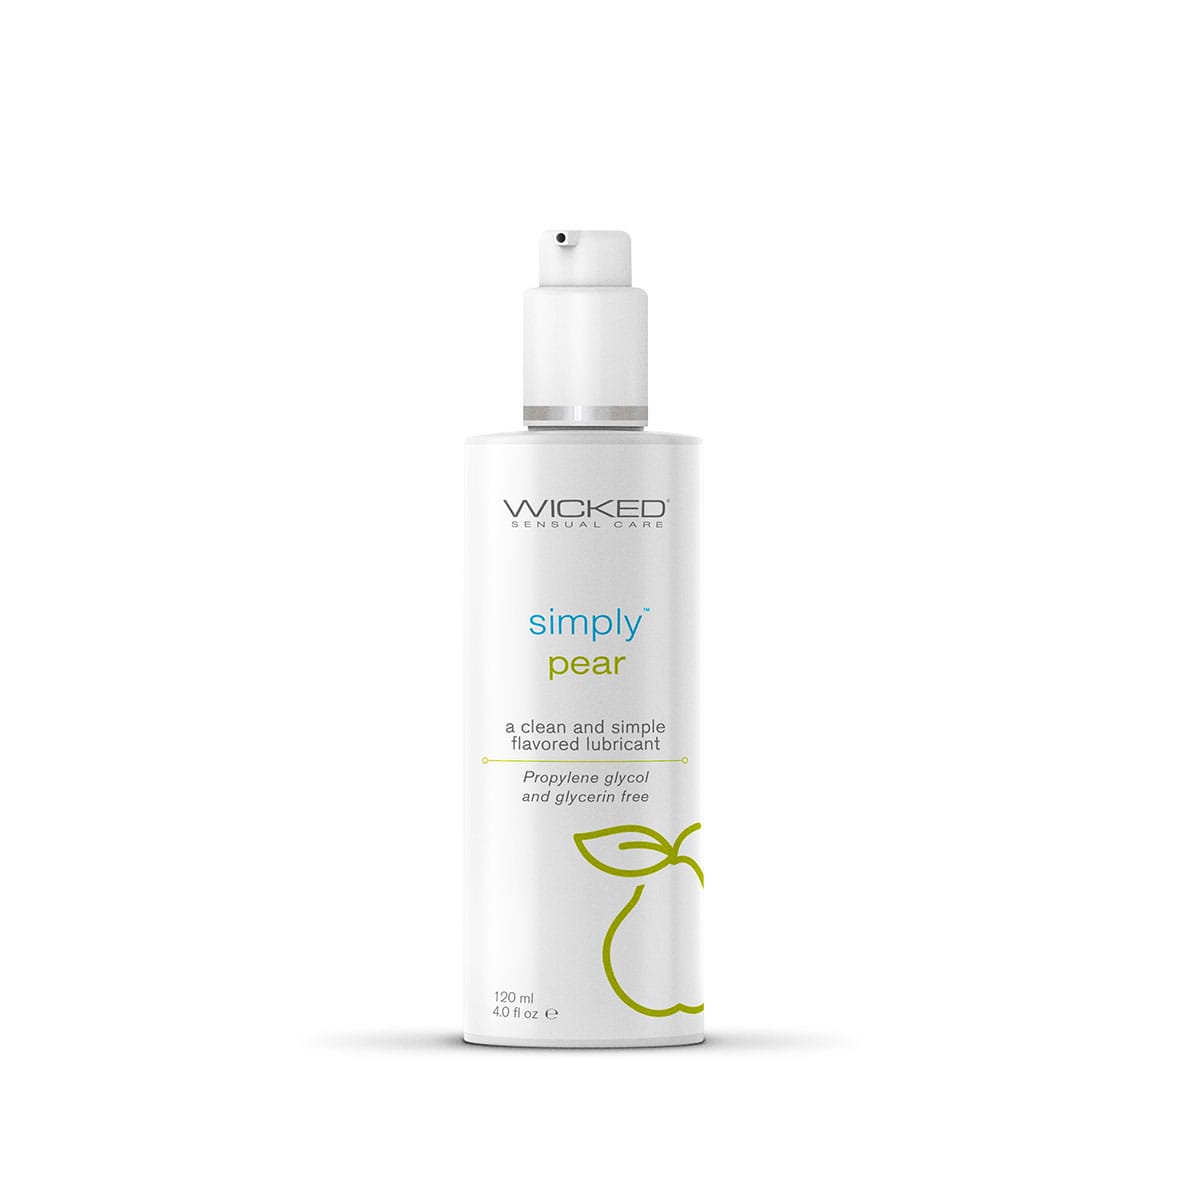 Buy   Simply Aqua      Pear water based lube for her.